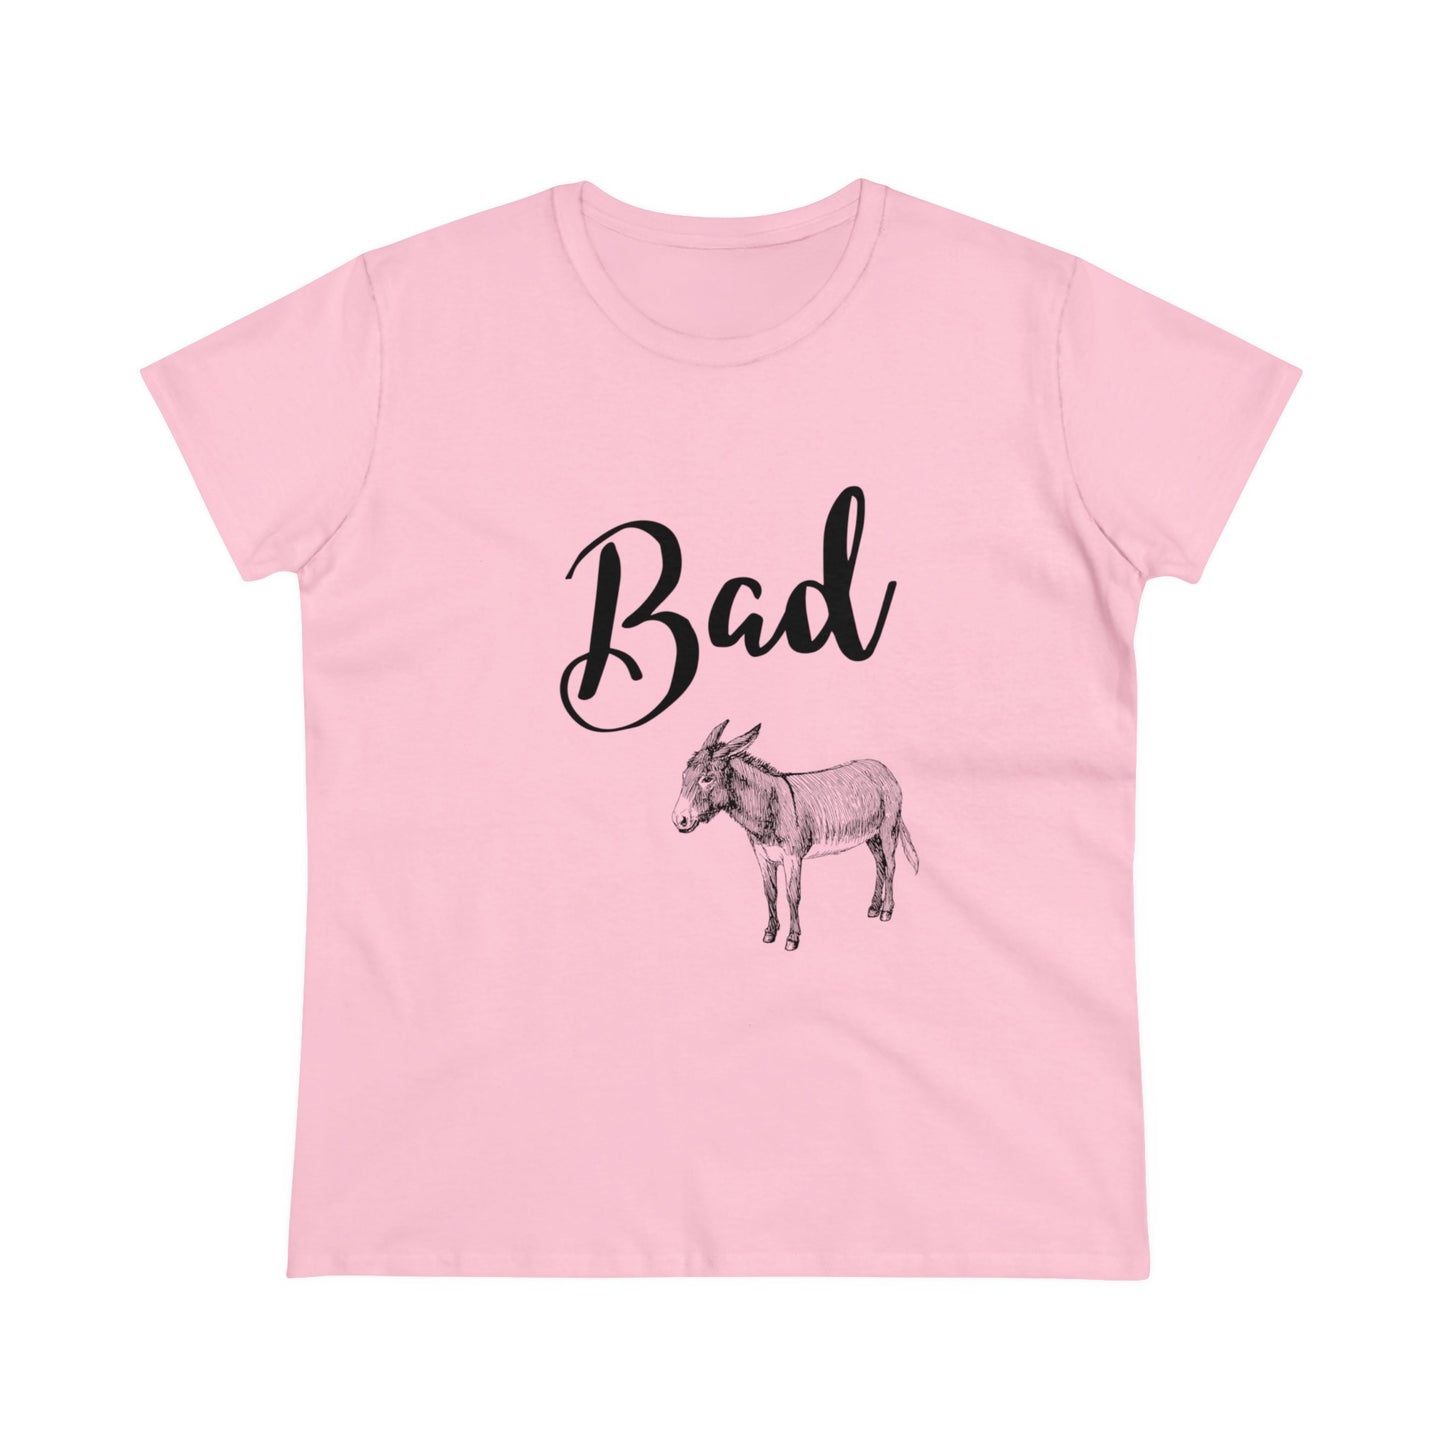 Bad A$$ Tee for Women